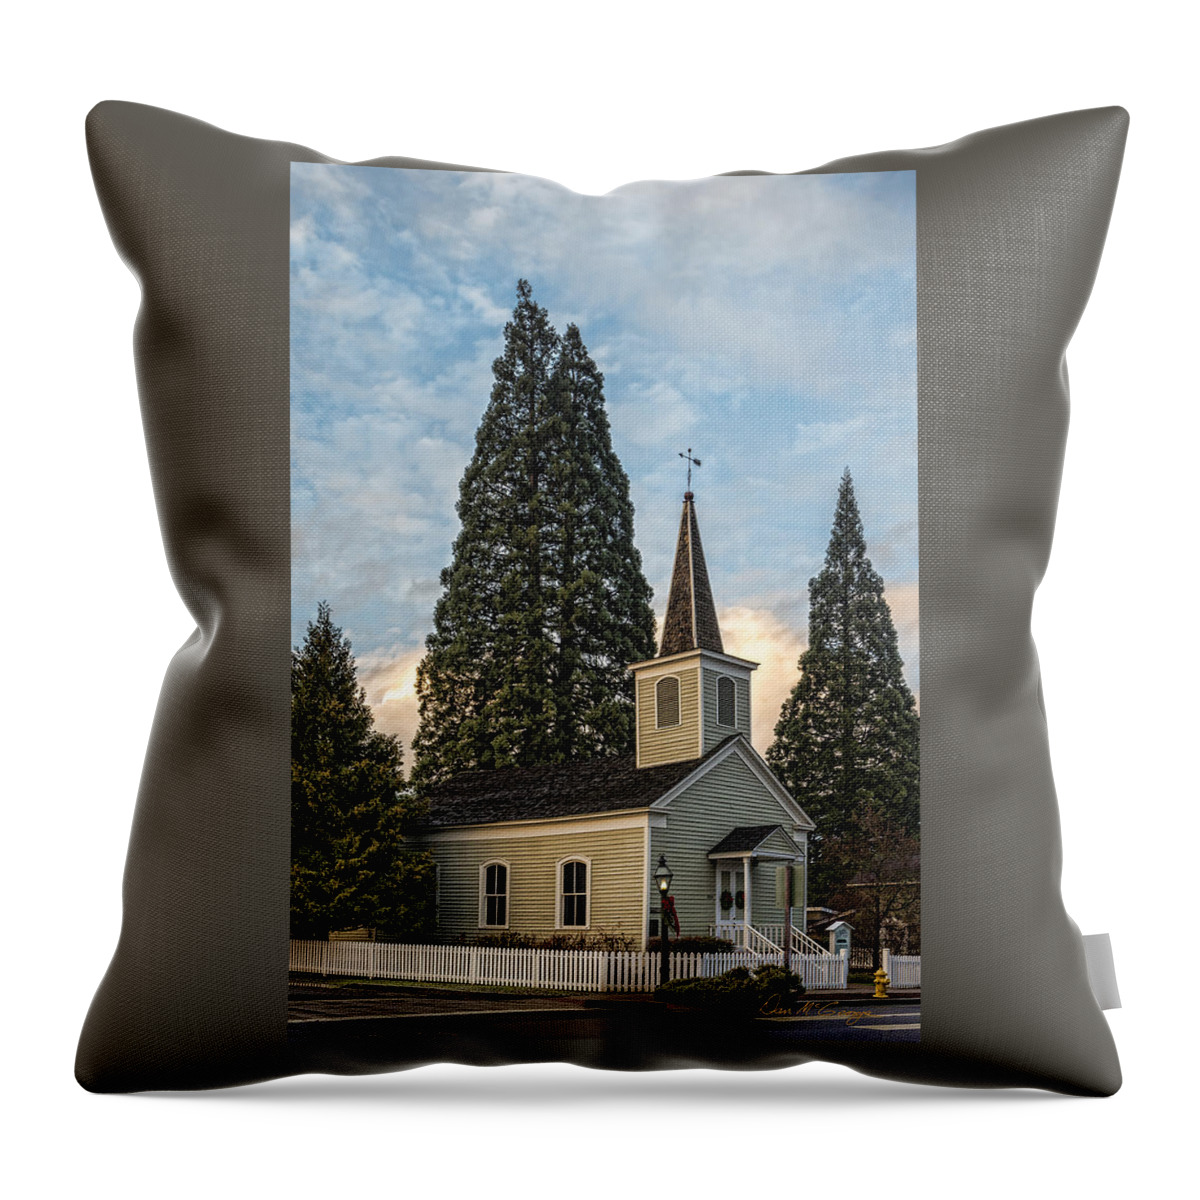 Jacksonville Throw Pillow featuring the photograph Sunday Sunset by Dan McGeorge